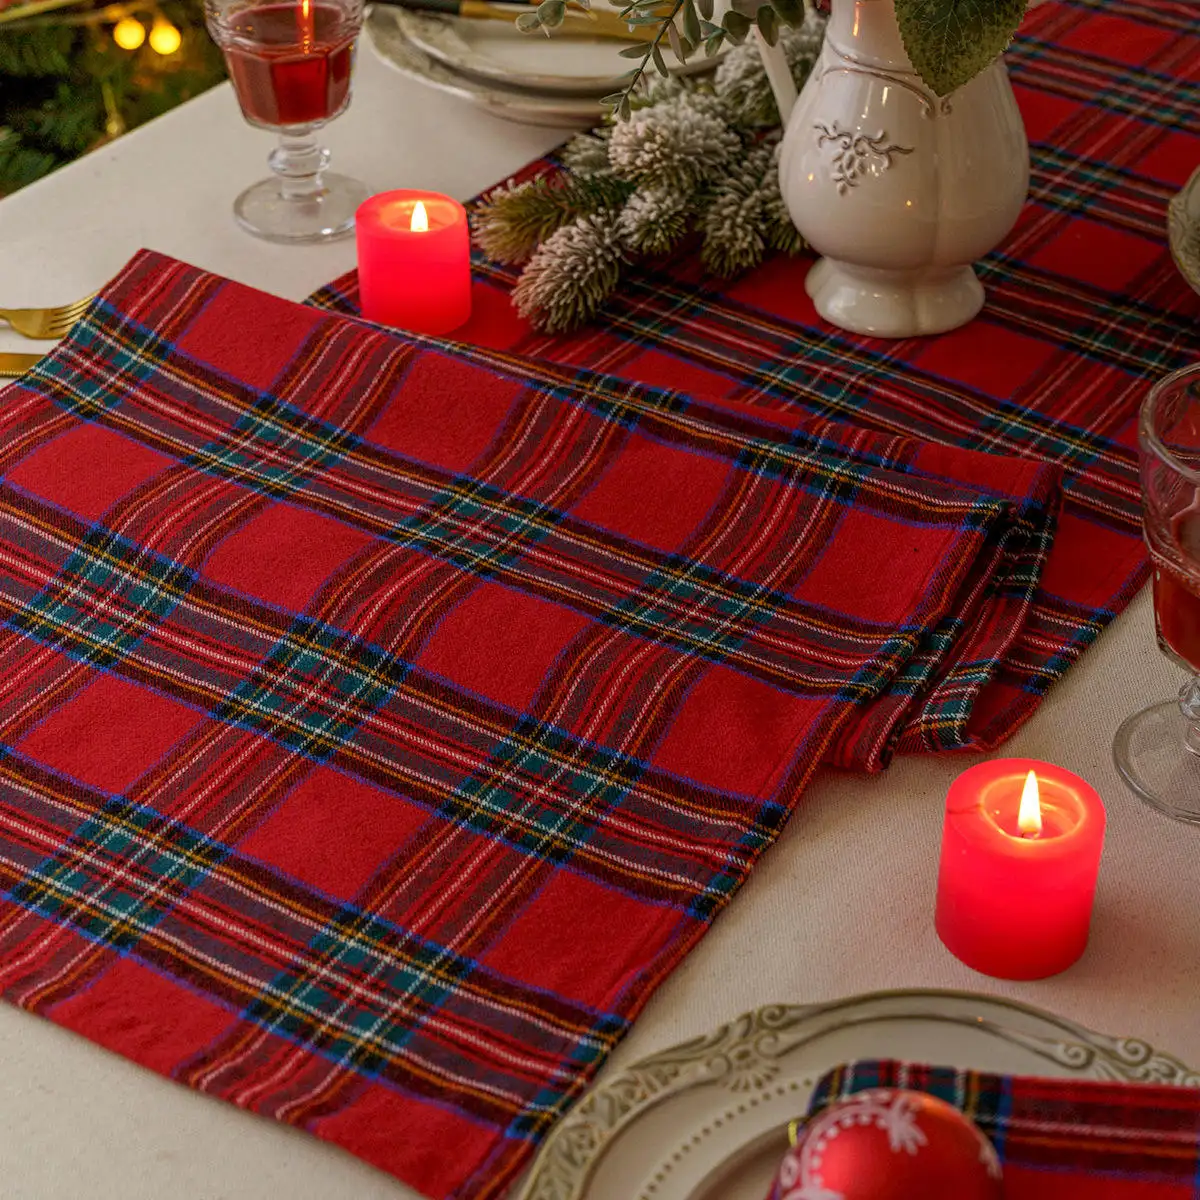 Wholesale Christmas Placemats Cotton Red Plaid Printed Linen Napkins Fabric Placemats Wedding Tea towels blend fabric